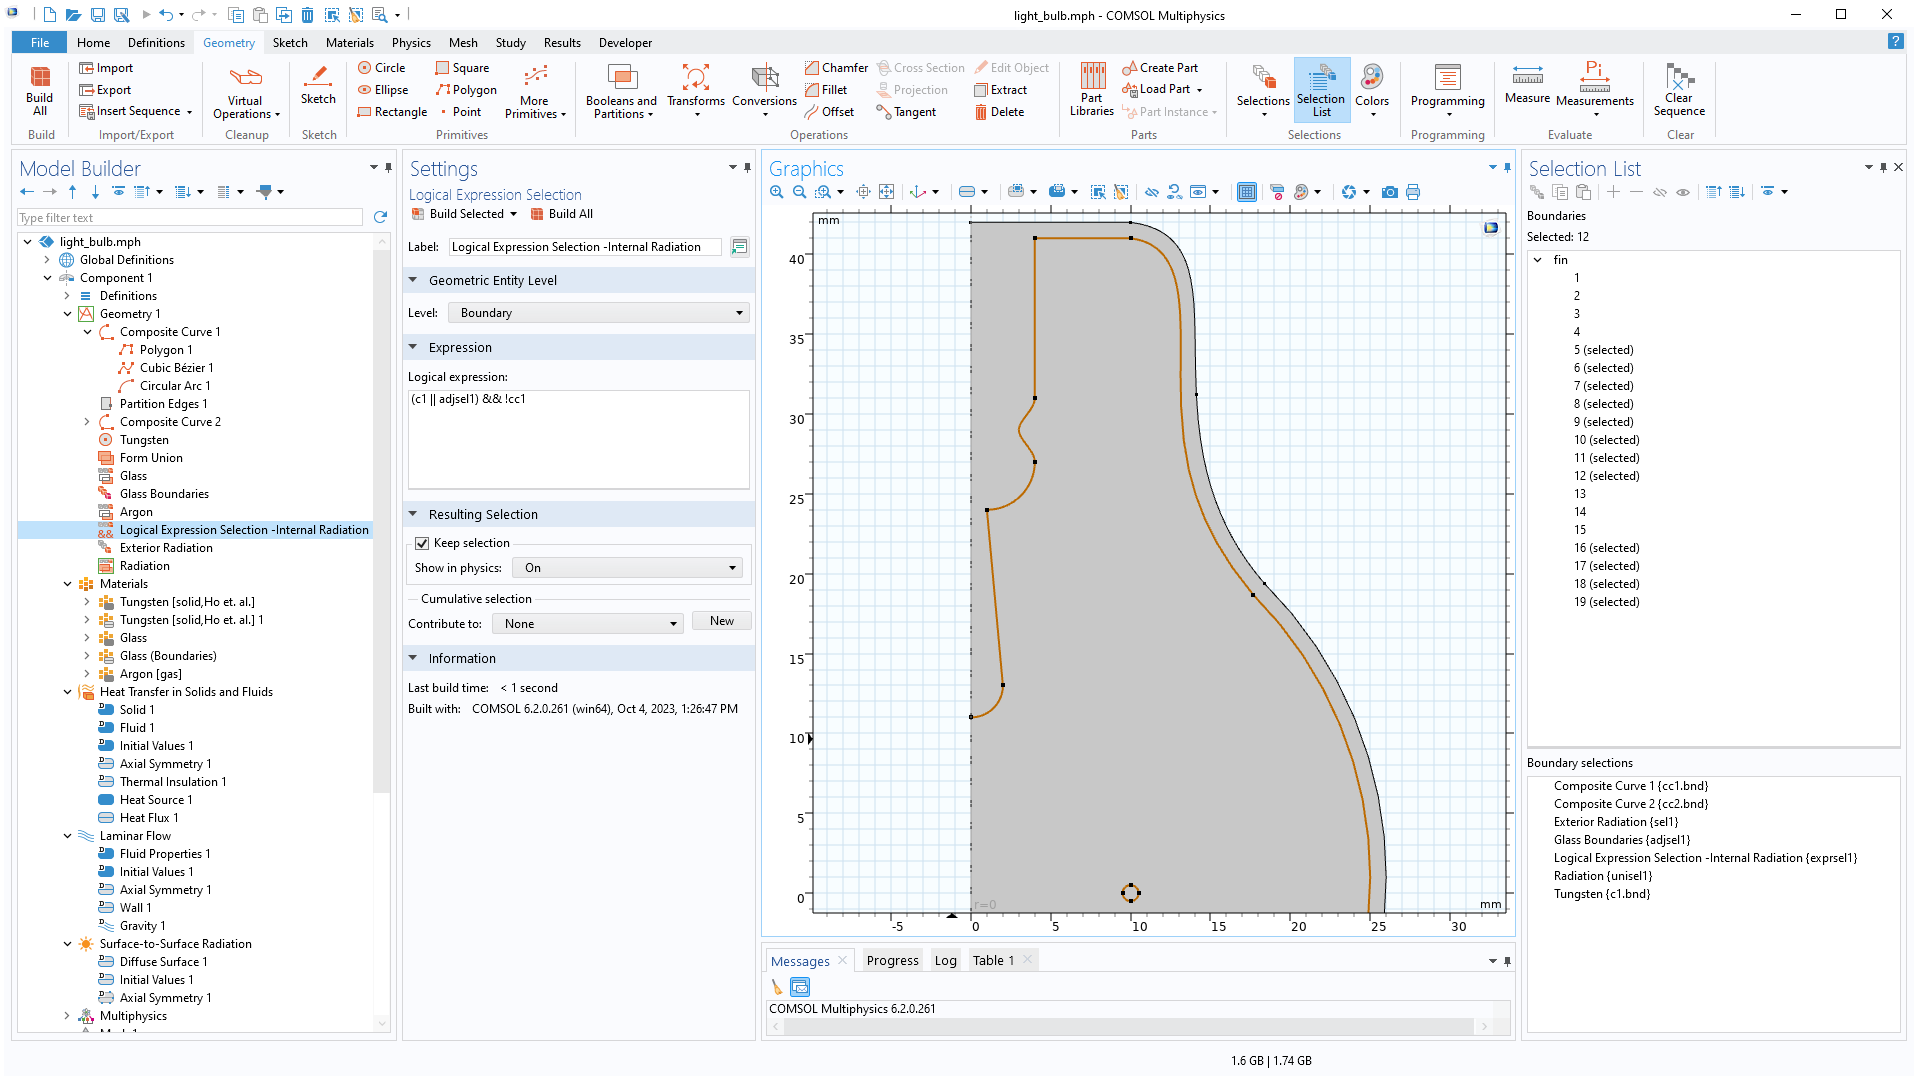 The COMSOL Multiphysics UI showing the Model Builder with a Logical Expression Selection node highlighted, the corresponding Settings window, and a light bulb model in the Graphics window.